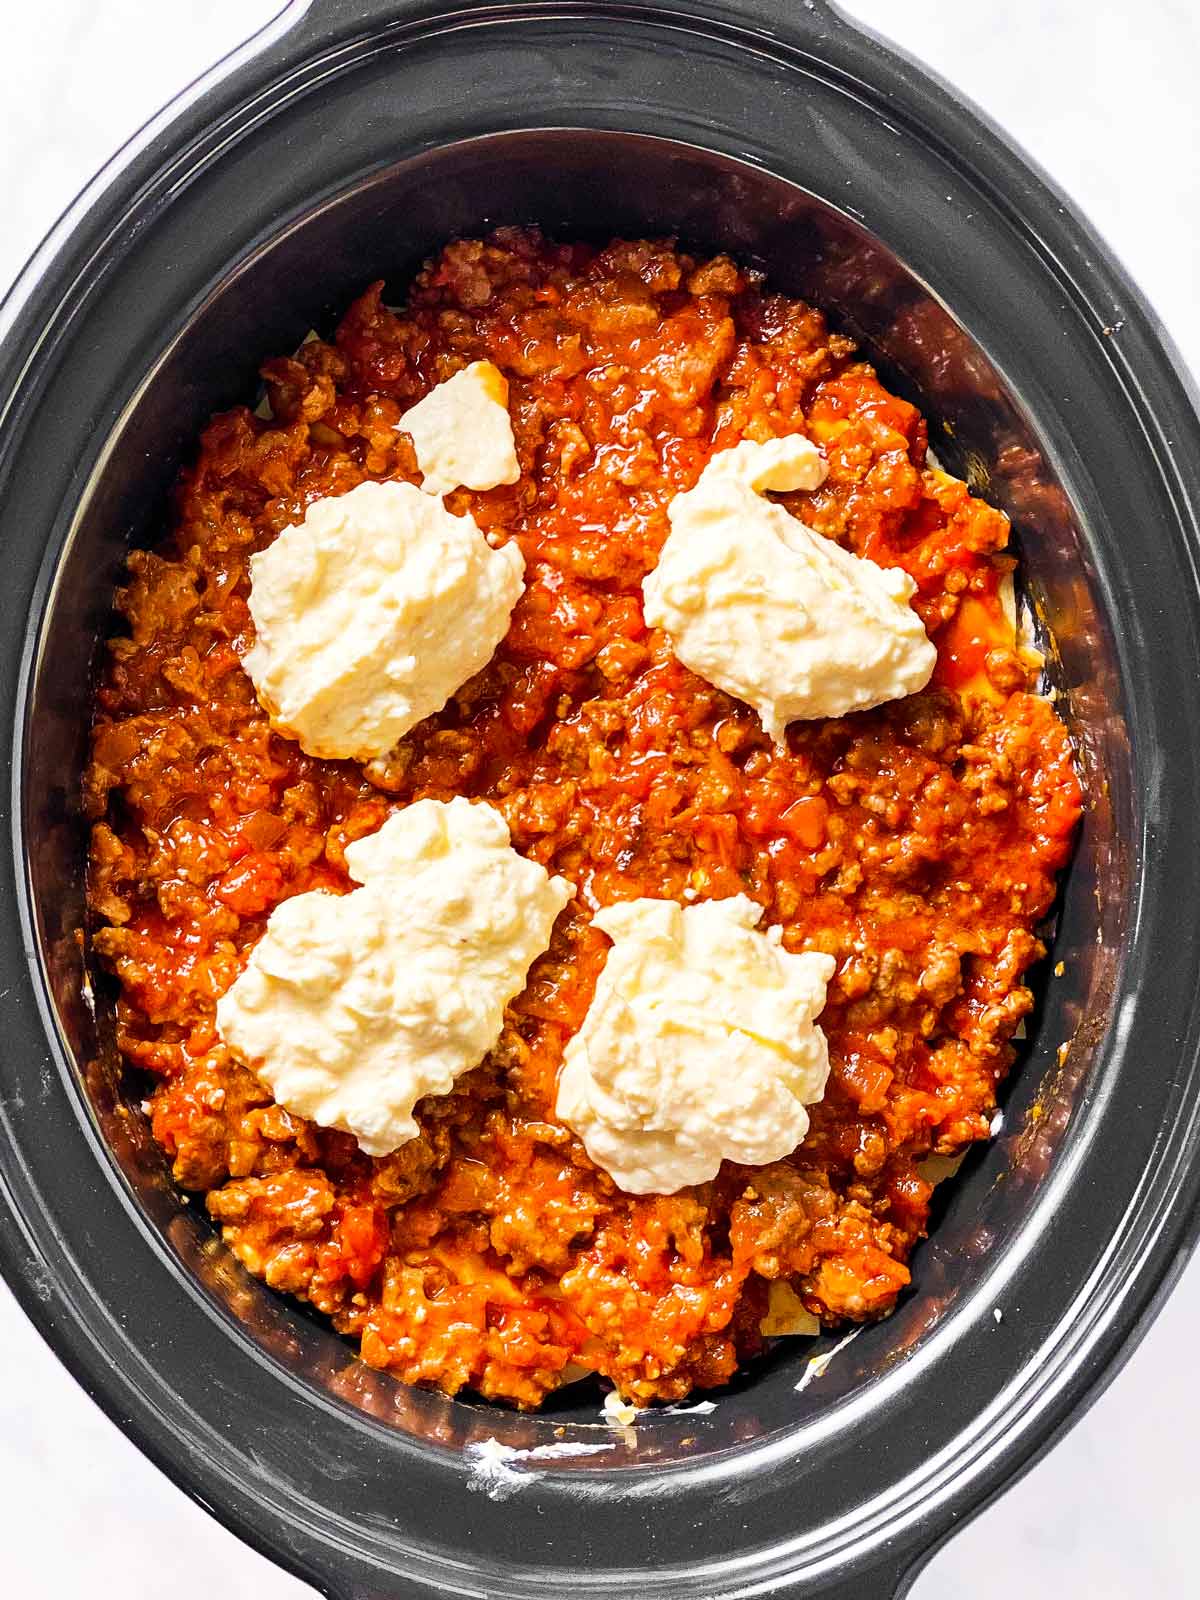 balls of ricotta sauce on top of meat sauce in black crock